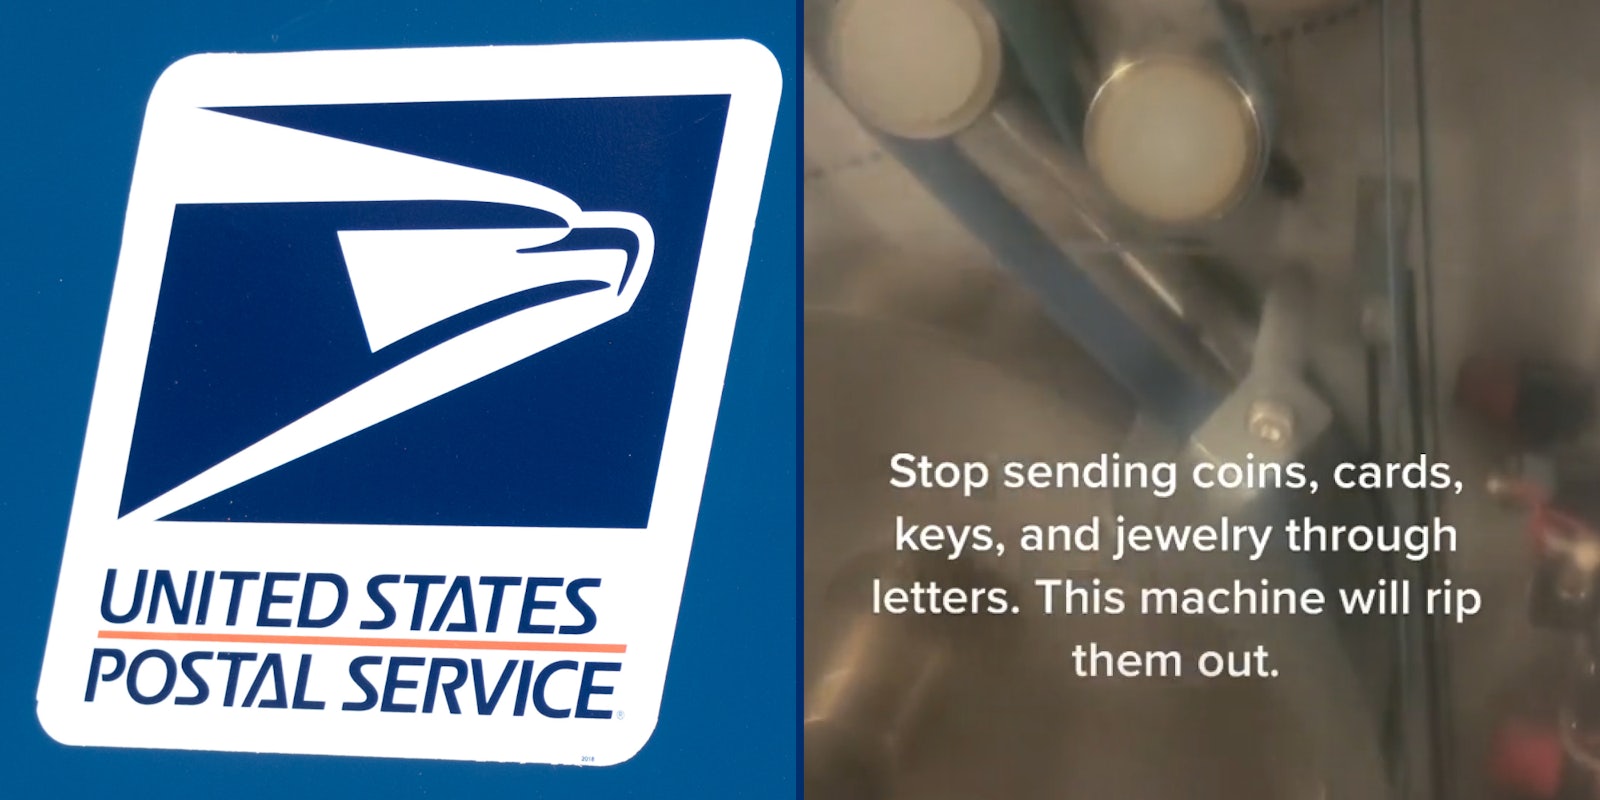 USPS logo (l) USPS sorting machine caption ' Stop sending coins, cards, keys, and jewelry through letters. This machine will rip them out.' (r)